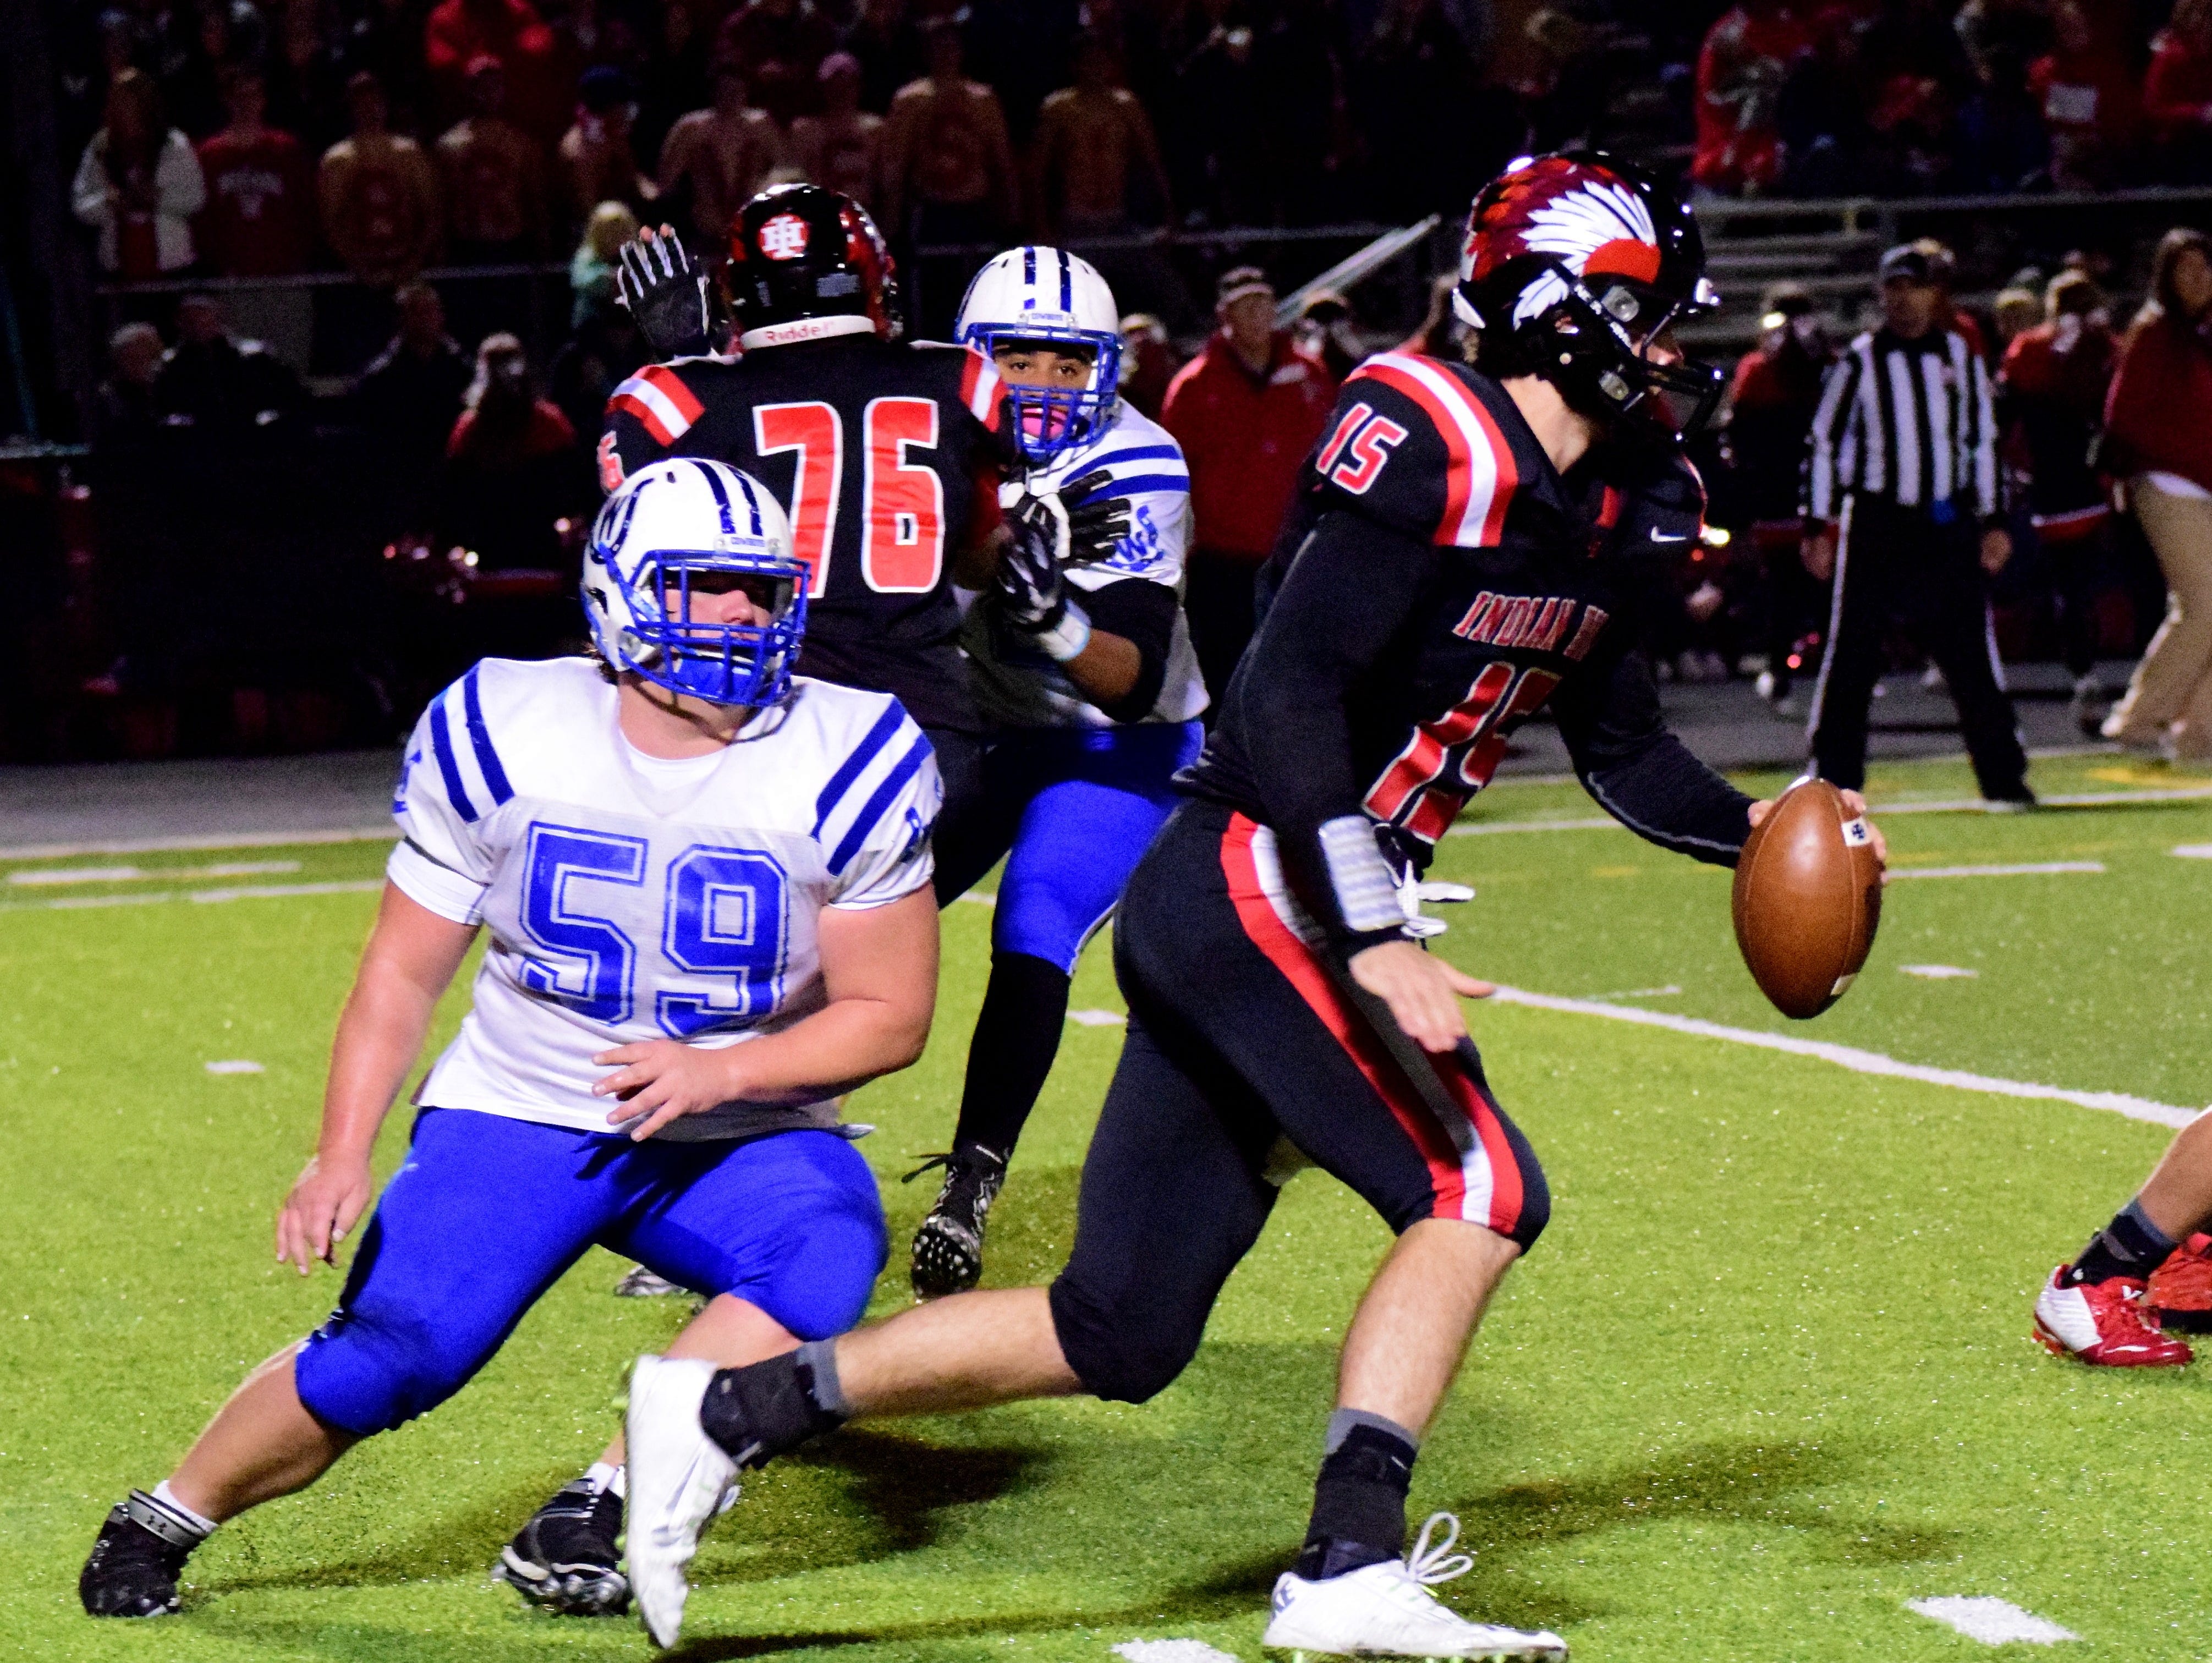 Indian Hill quarterback Reed Aichholz (15) is pressured out of the pocket by Wyoming's Cooper O'Gara (59). November 7, 2015